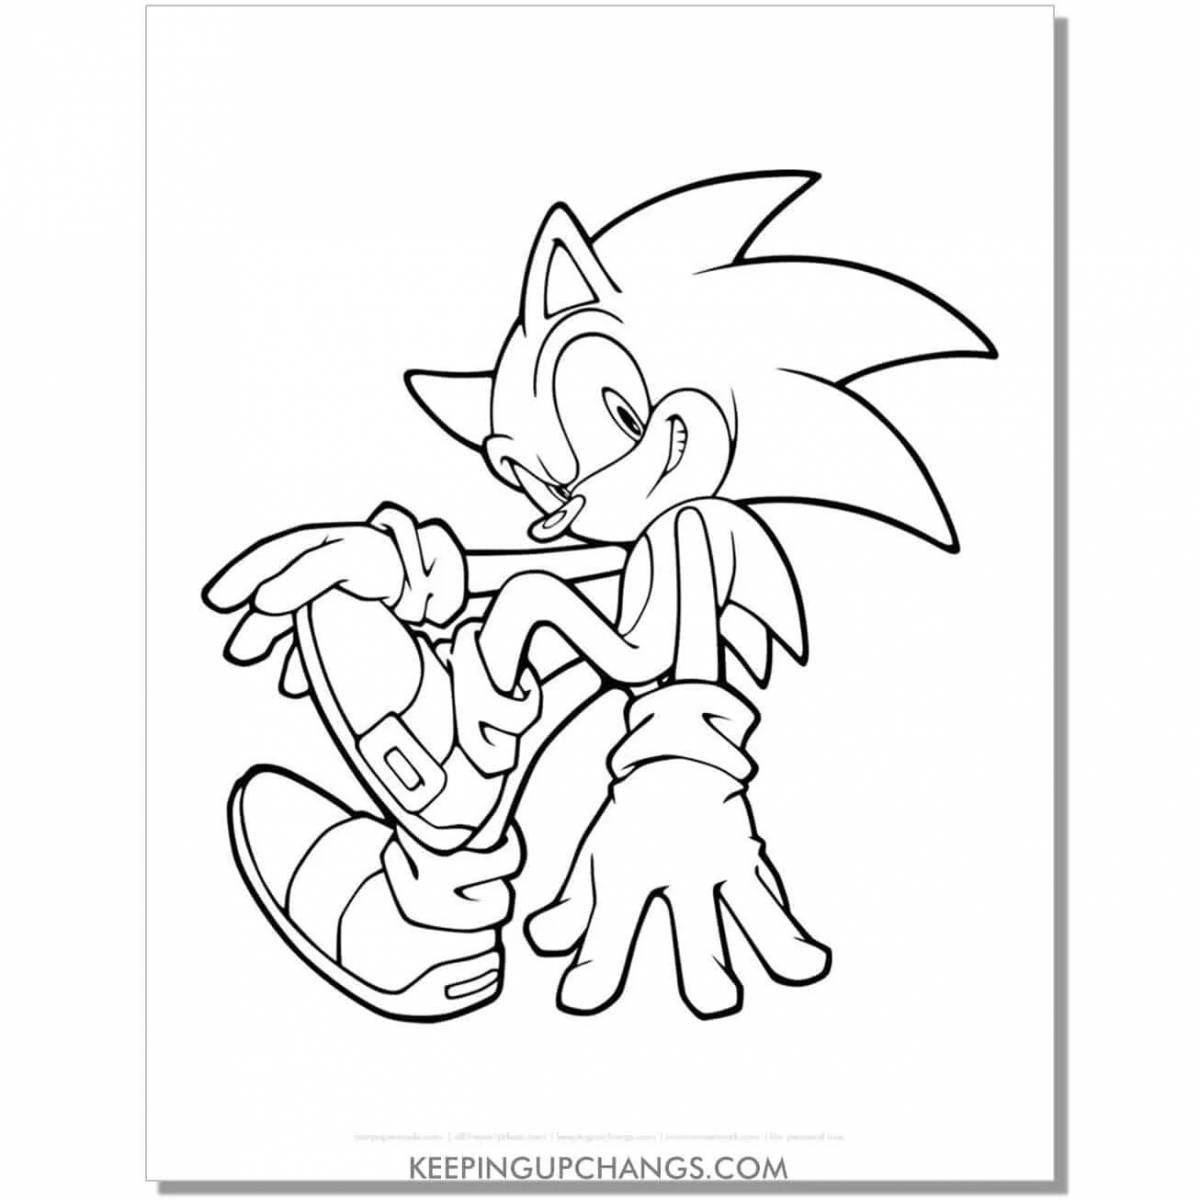 Cute sonic tails and knuckles coloring book